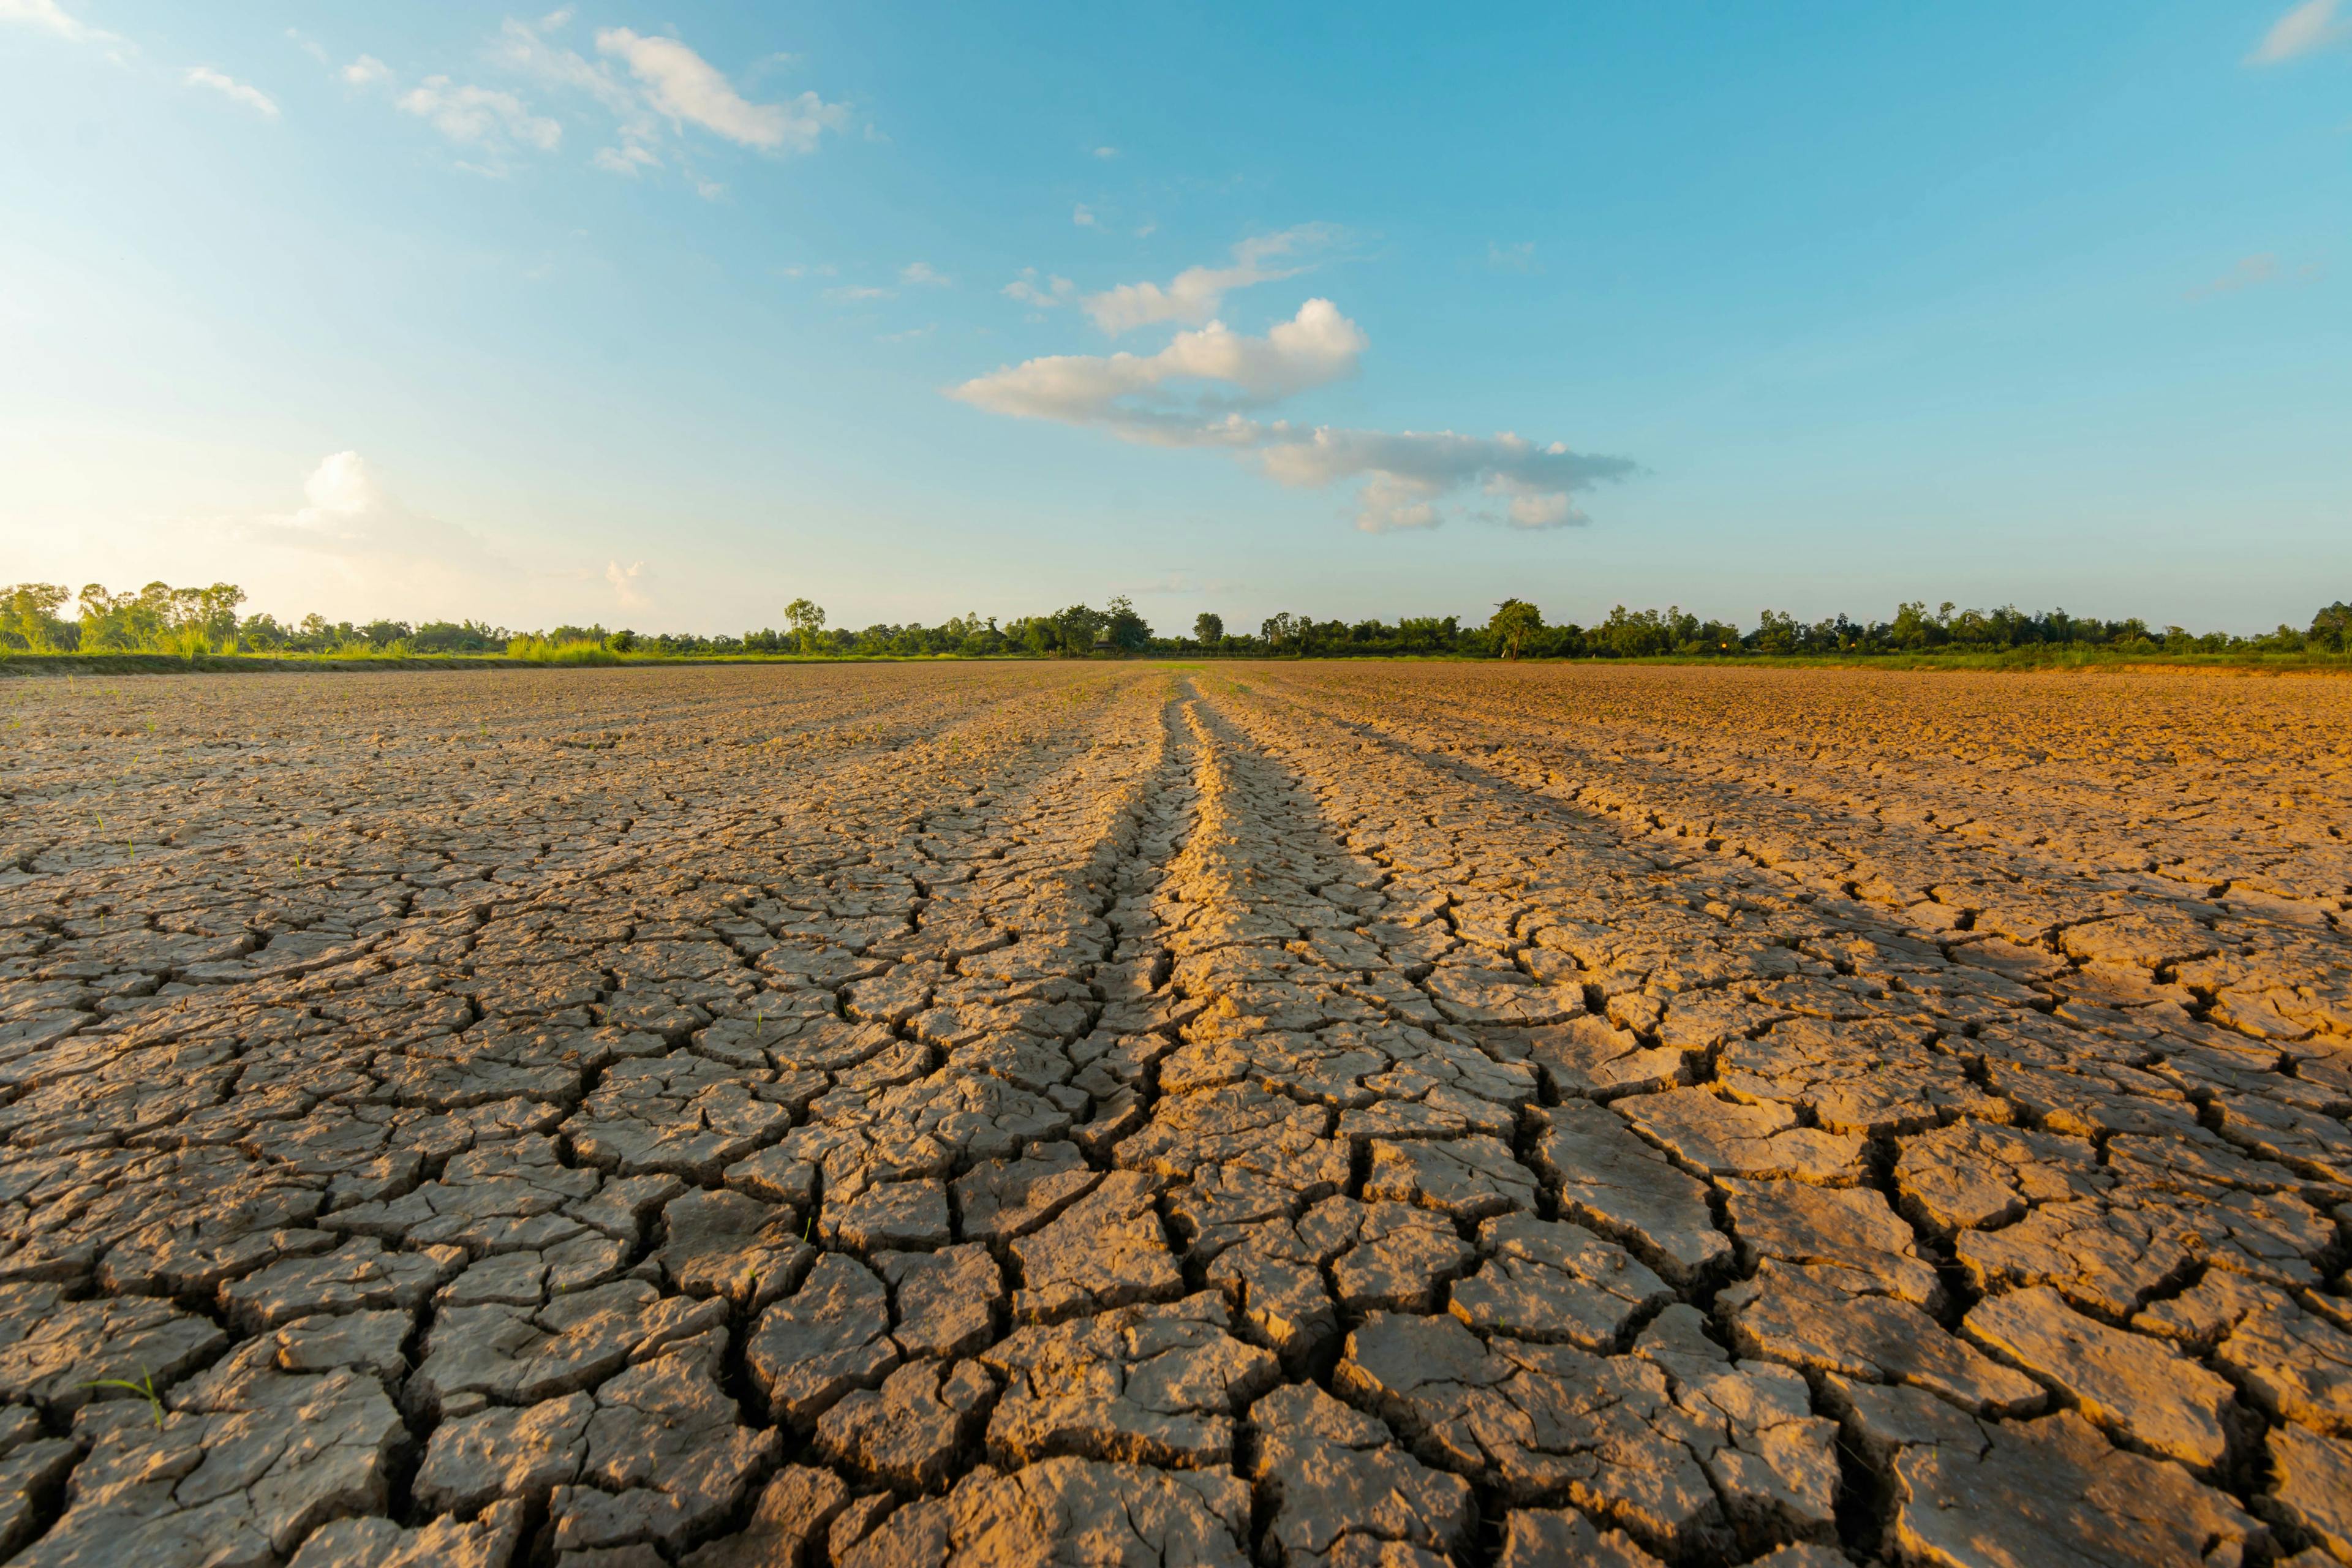 The land is dry and parched because of global warming. | Image Credit: © neenawat555 - stock.adobe.com.